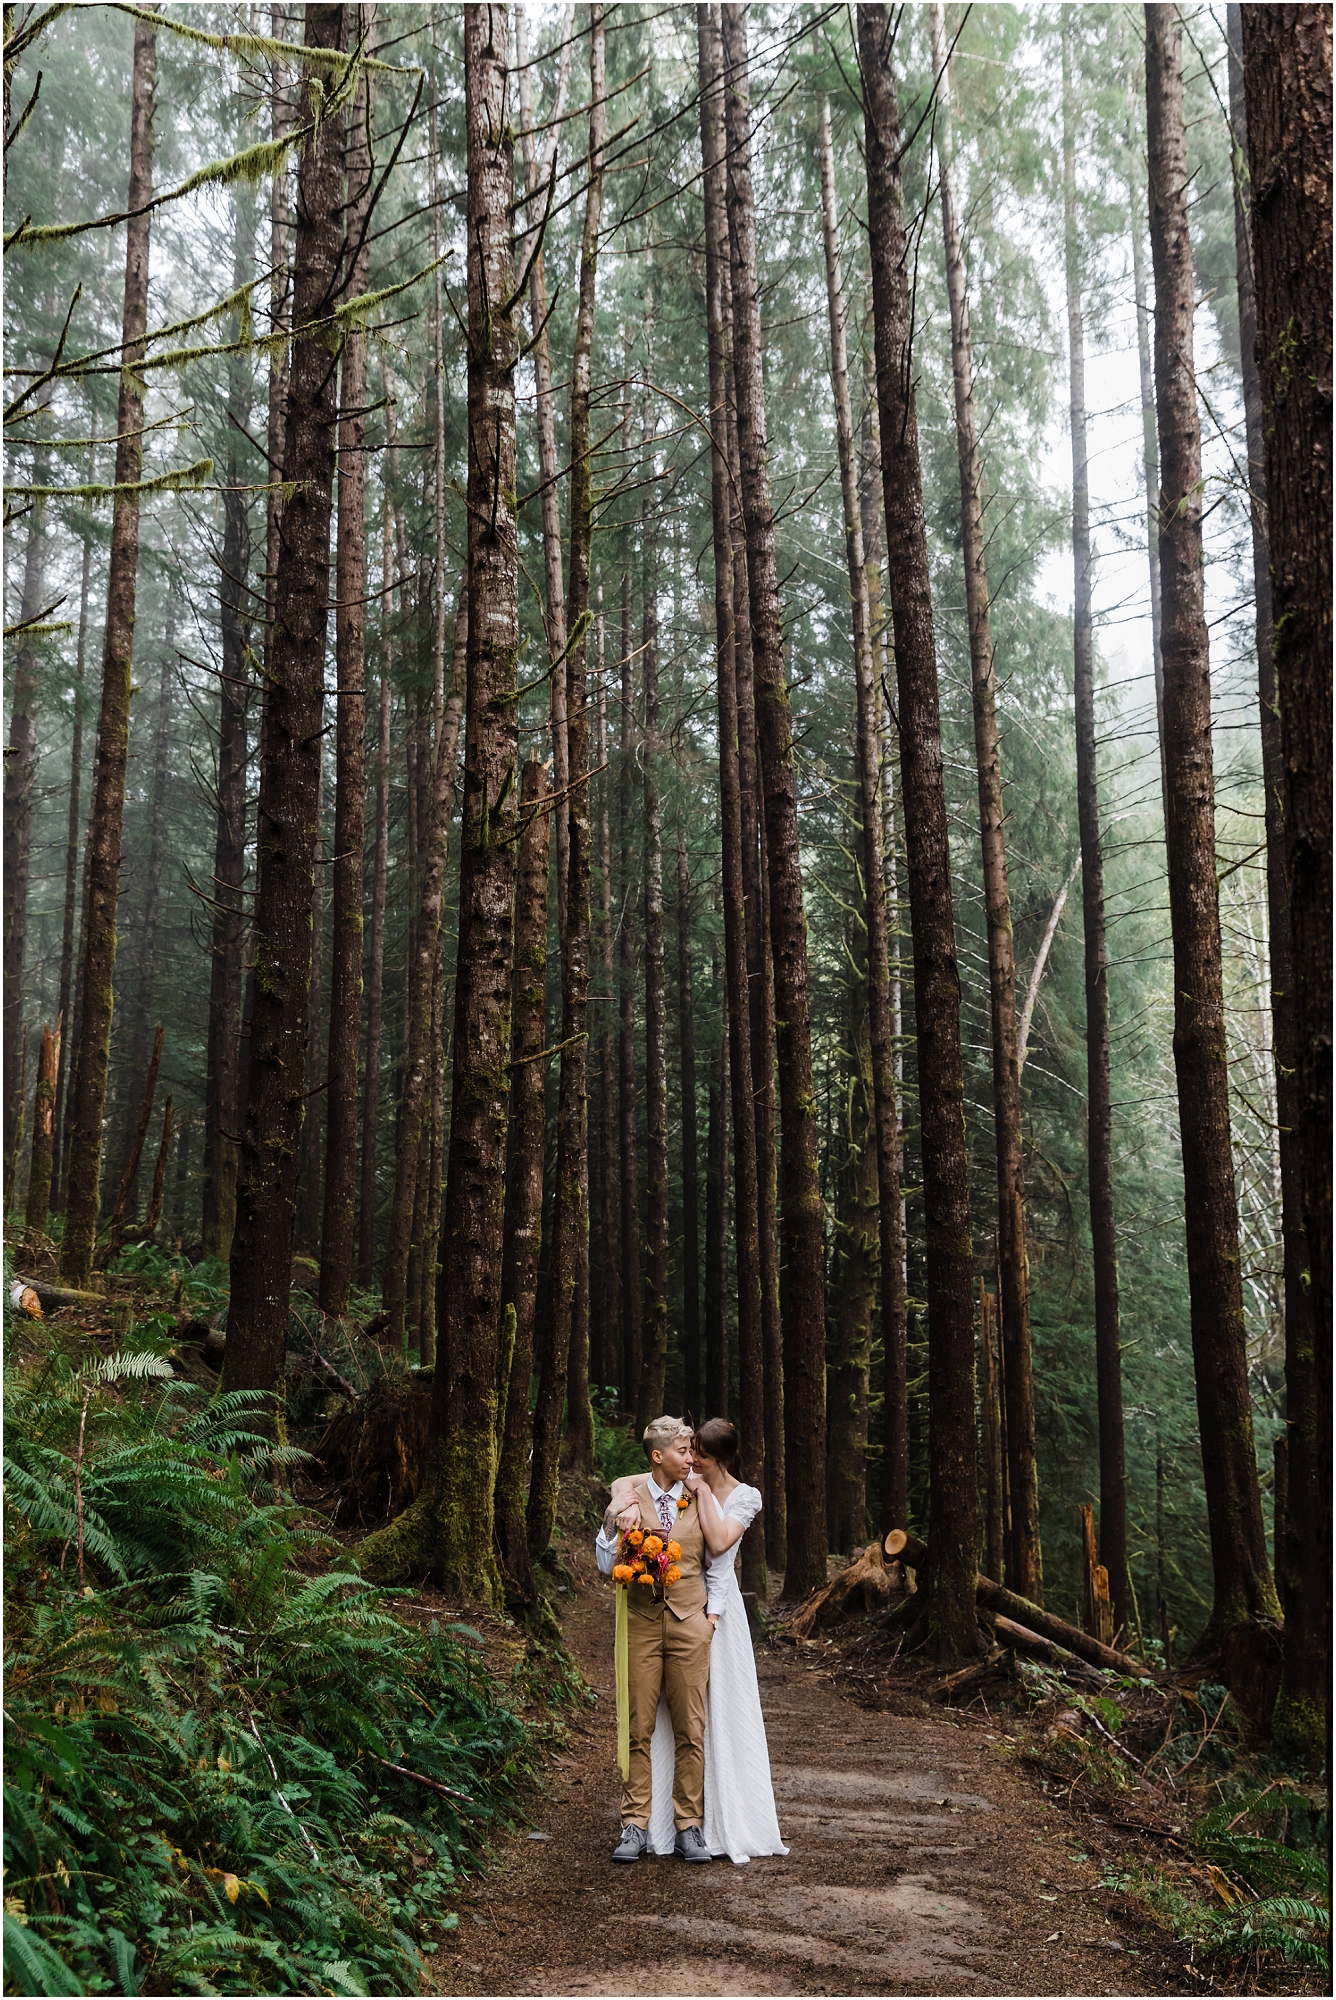 A gorgeous couple stands in the dense, dark forest covered in green ferns wearing their wedding attire for their PNW hiking elopement. | Erica Swantek Photography